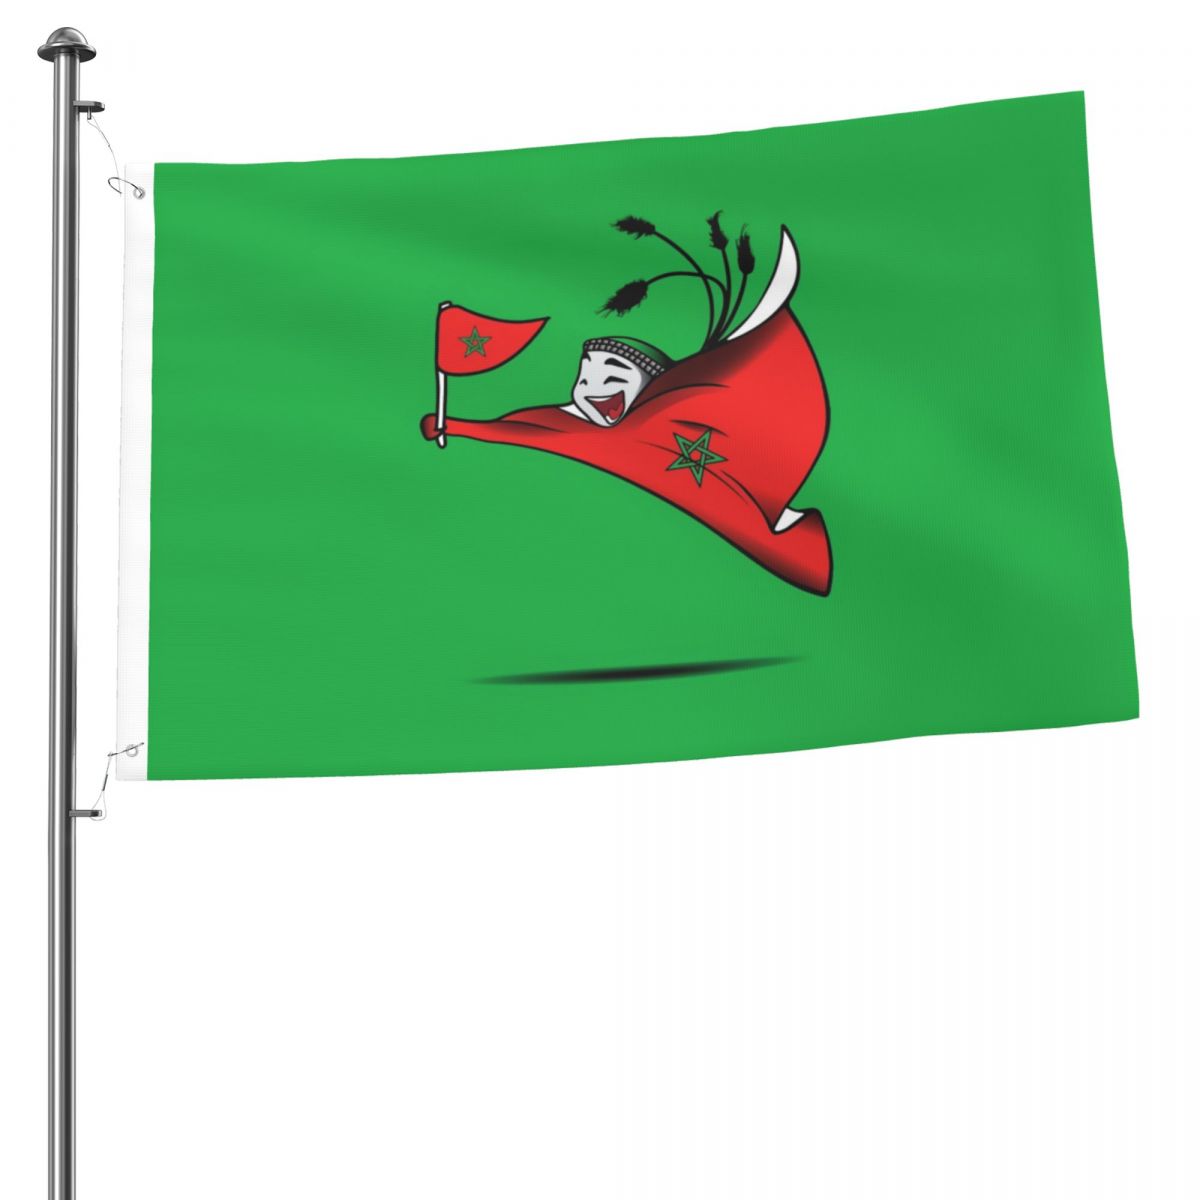 Morocco World Cup 2022 Mascot 2x3FT Flag